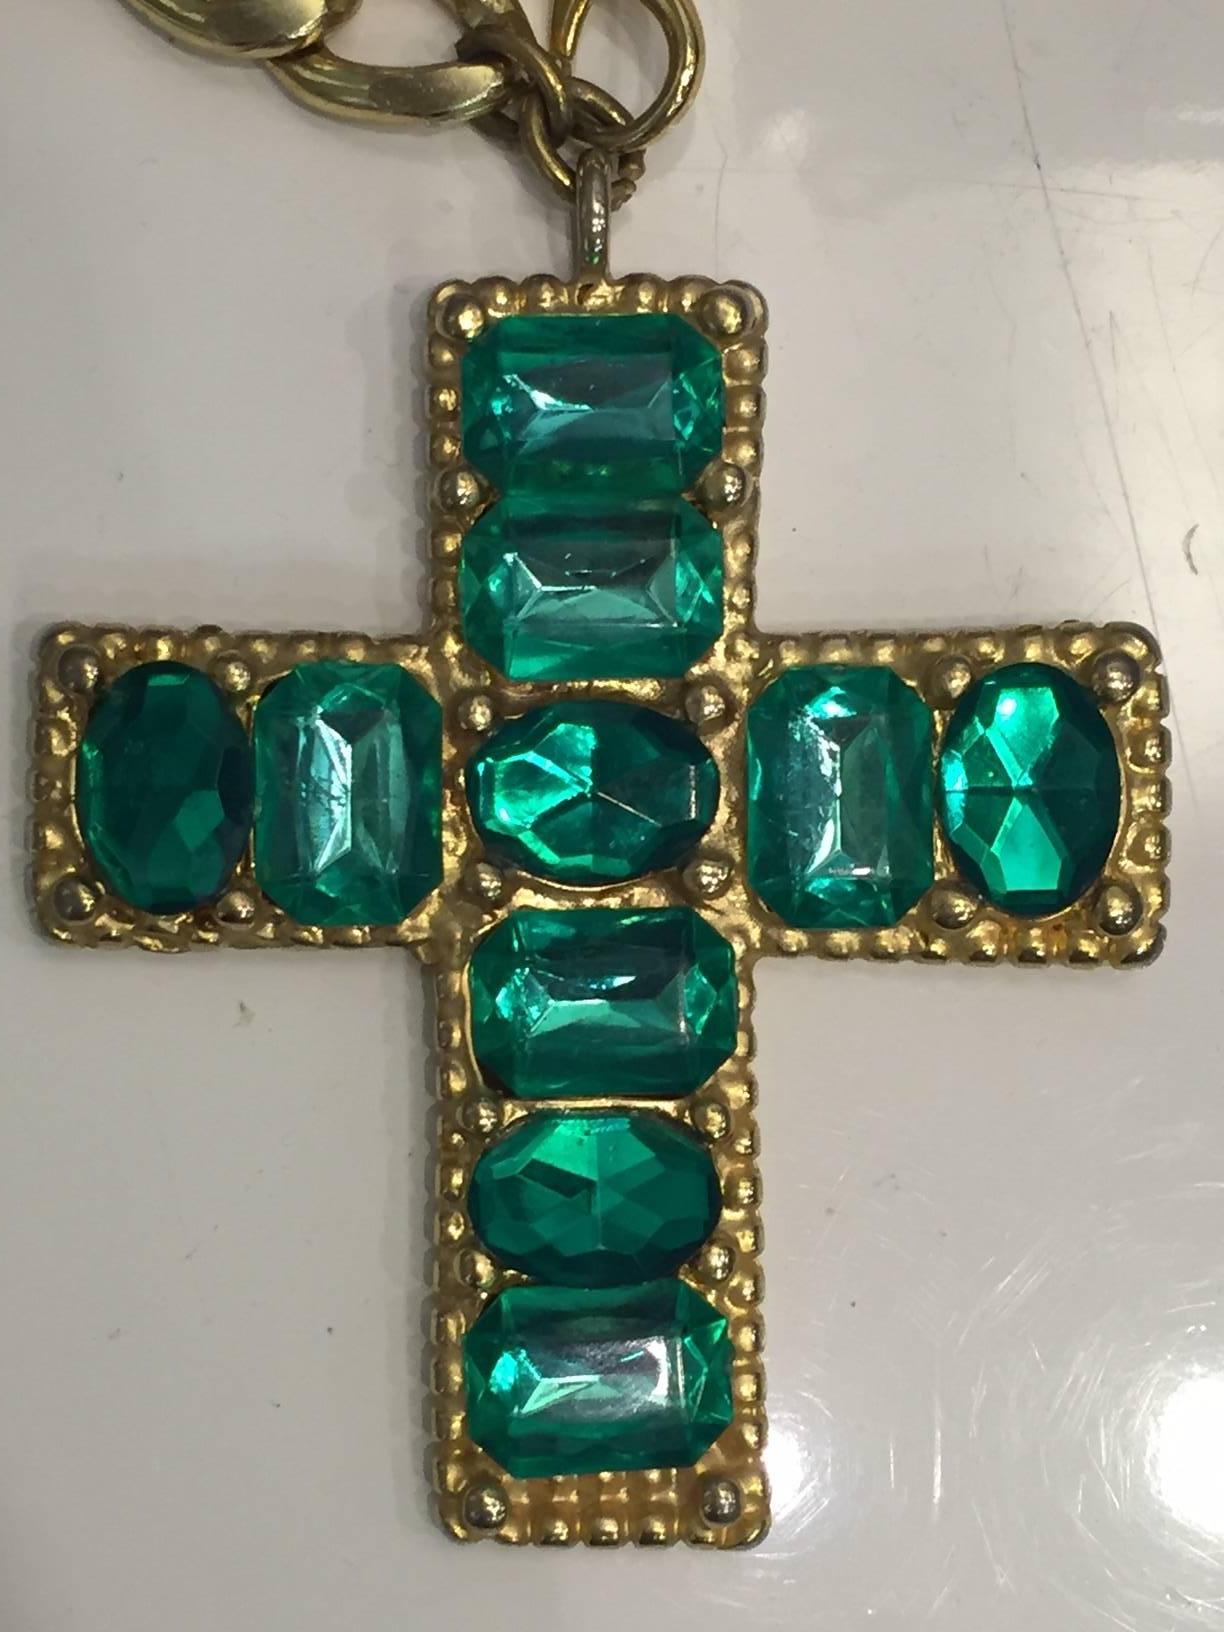 1980s Chunky emerald green resin jeweled cross in gold-tone setting and chain. Lobster-claw closure at center front.  Cross pendant is 4